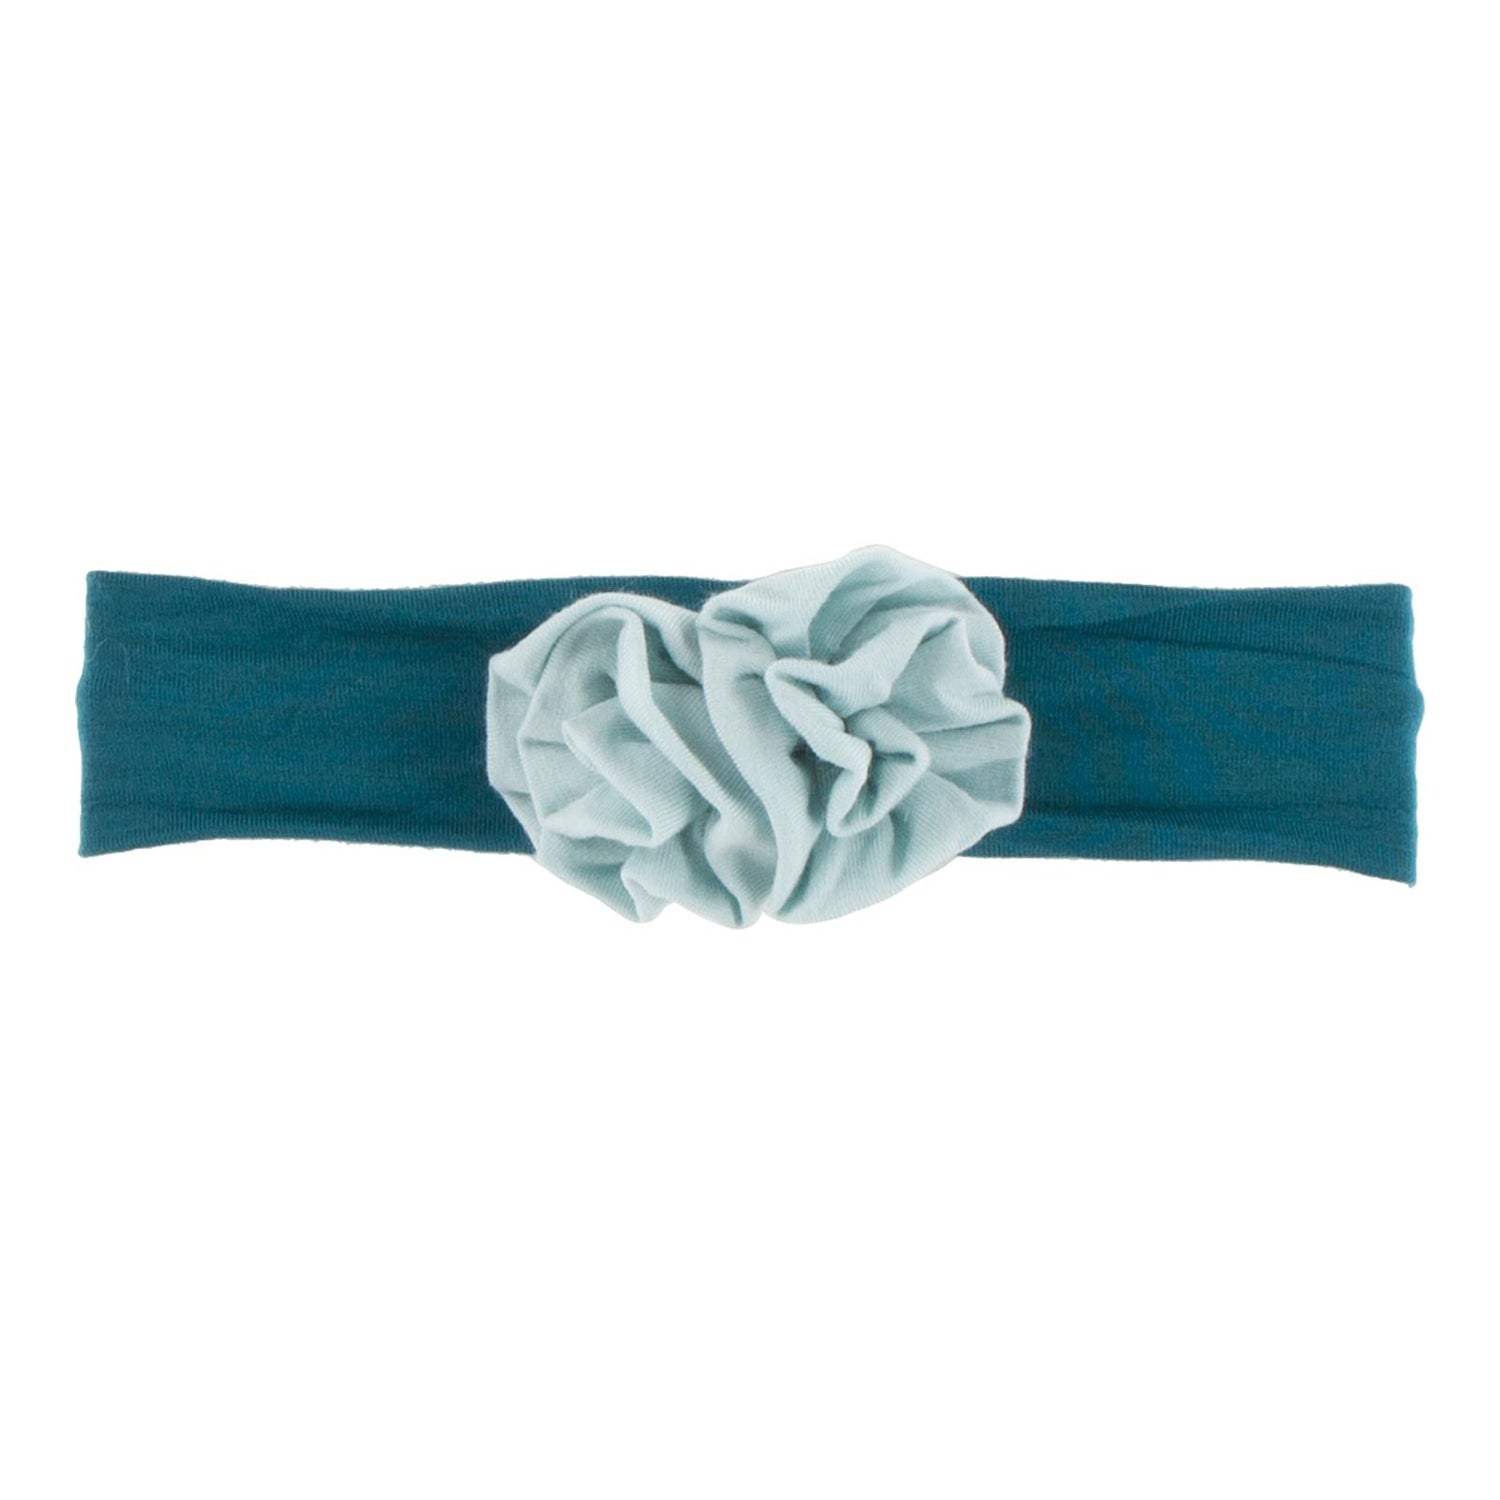 Flower Headband in Heritage Blue with Spring Sky